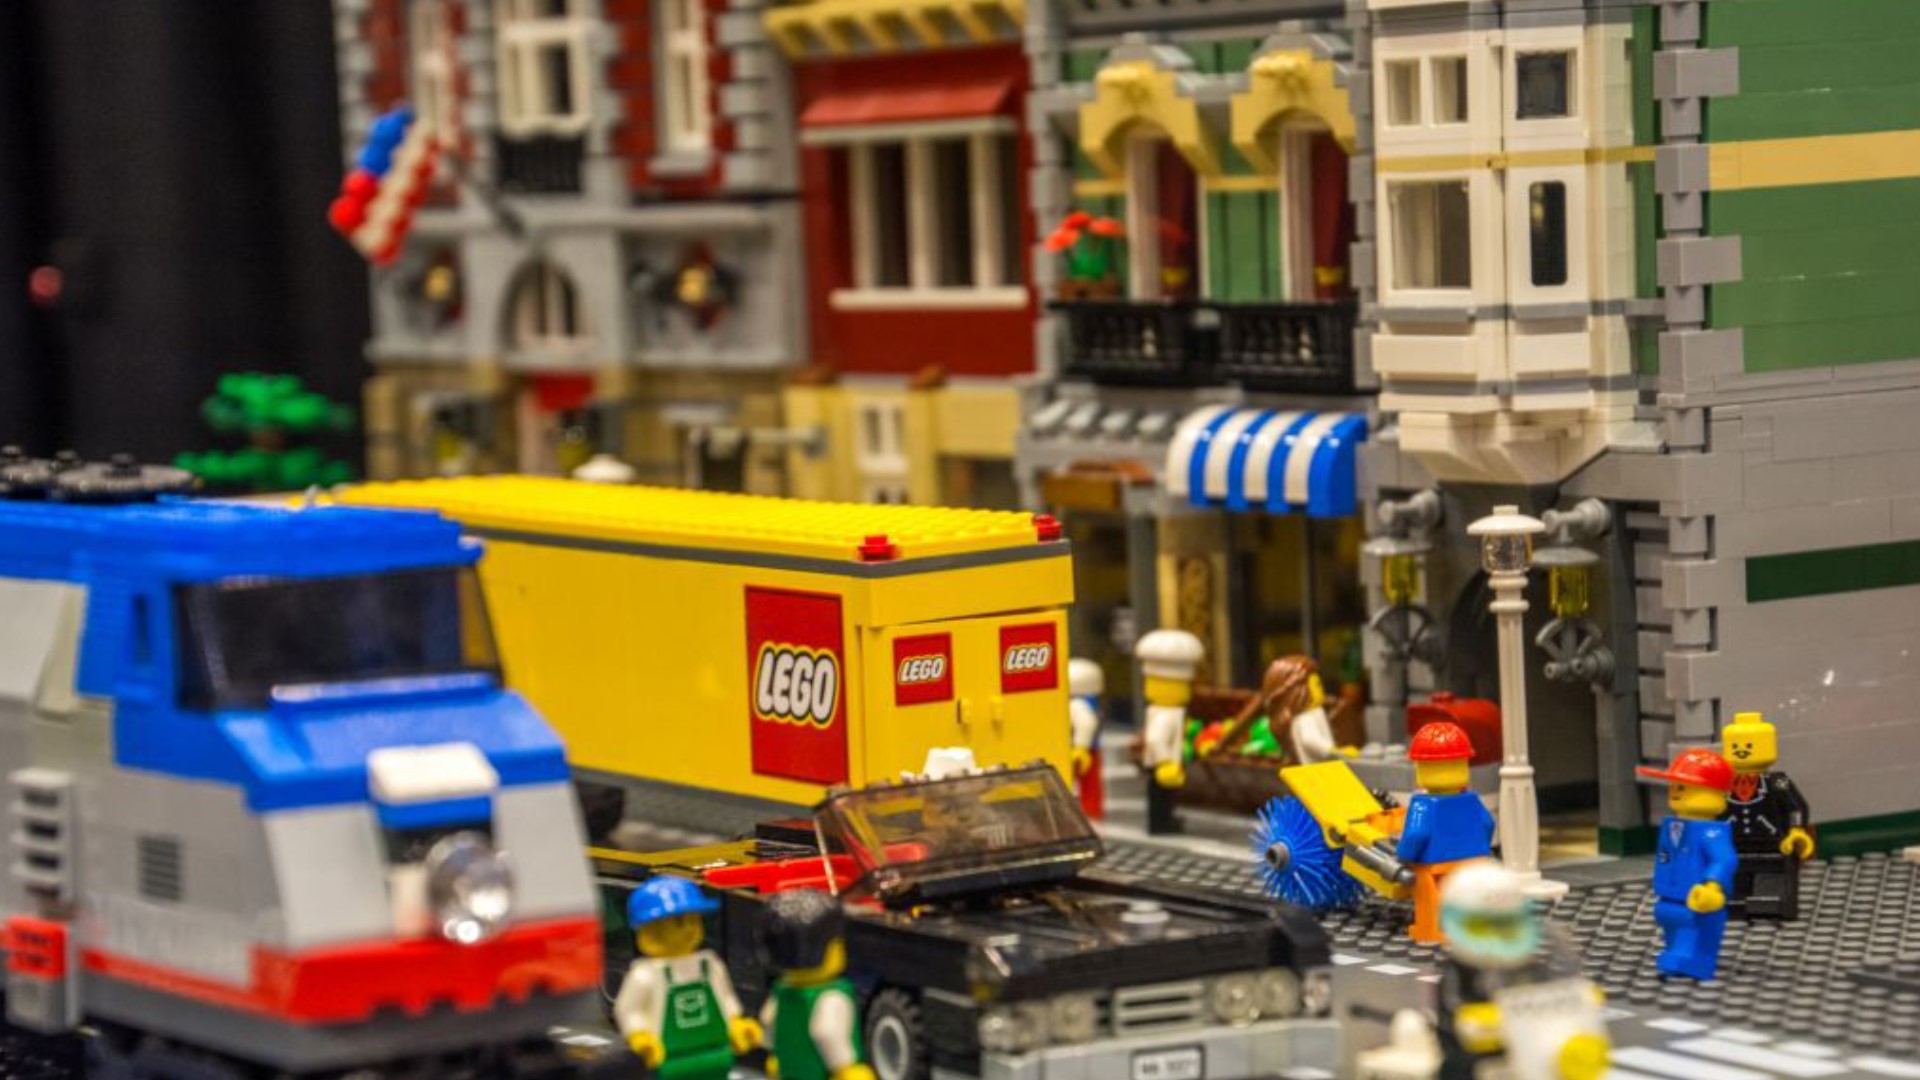 LEGO convention coming to Portland, Maine in April, May 2022